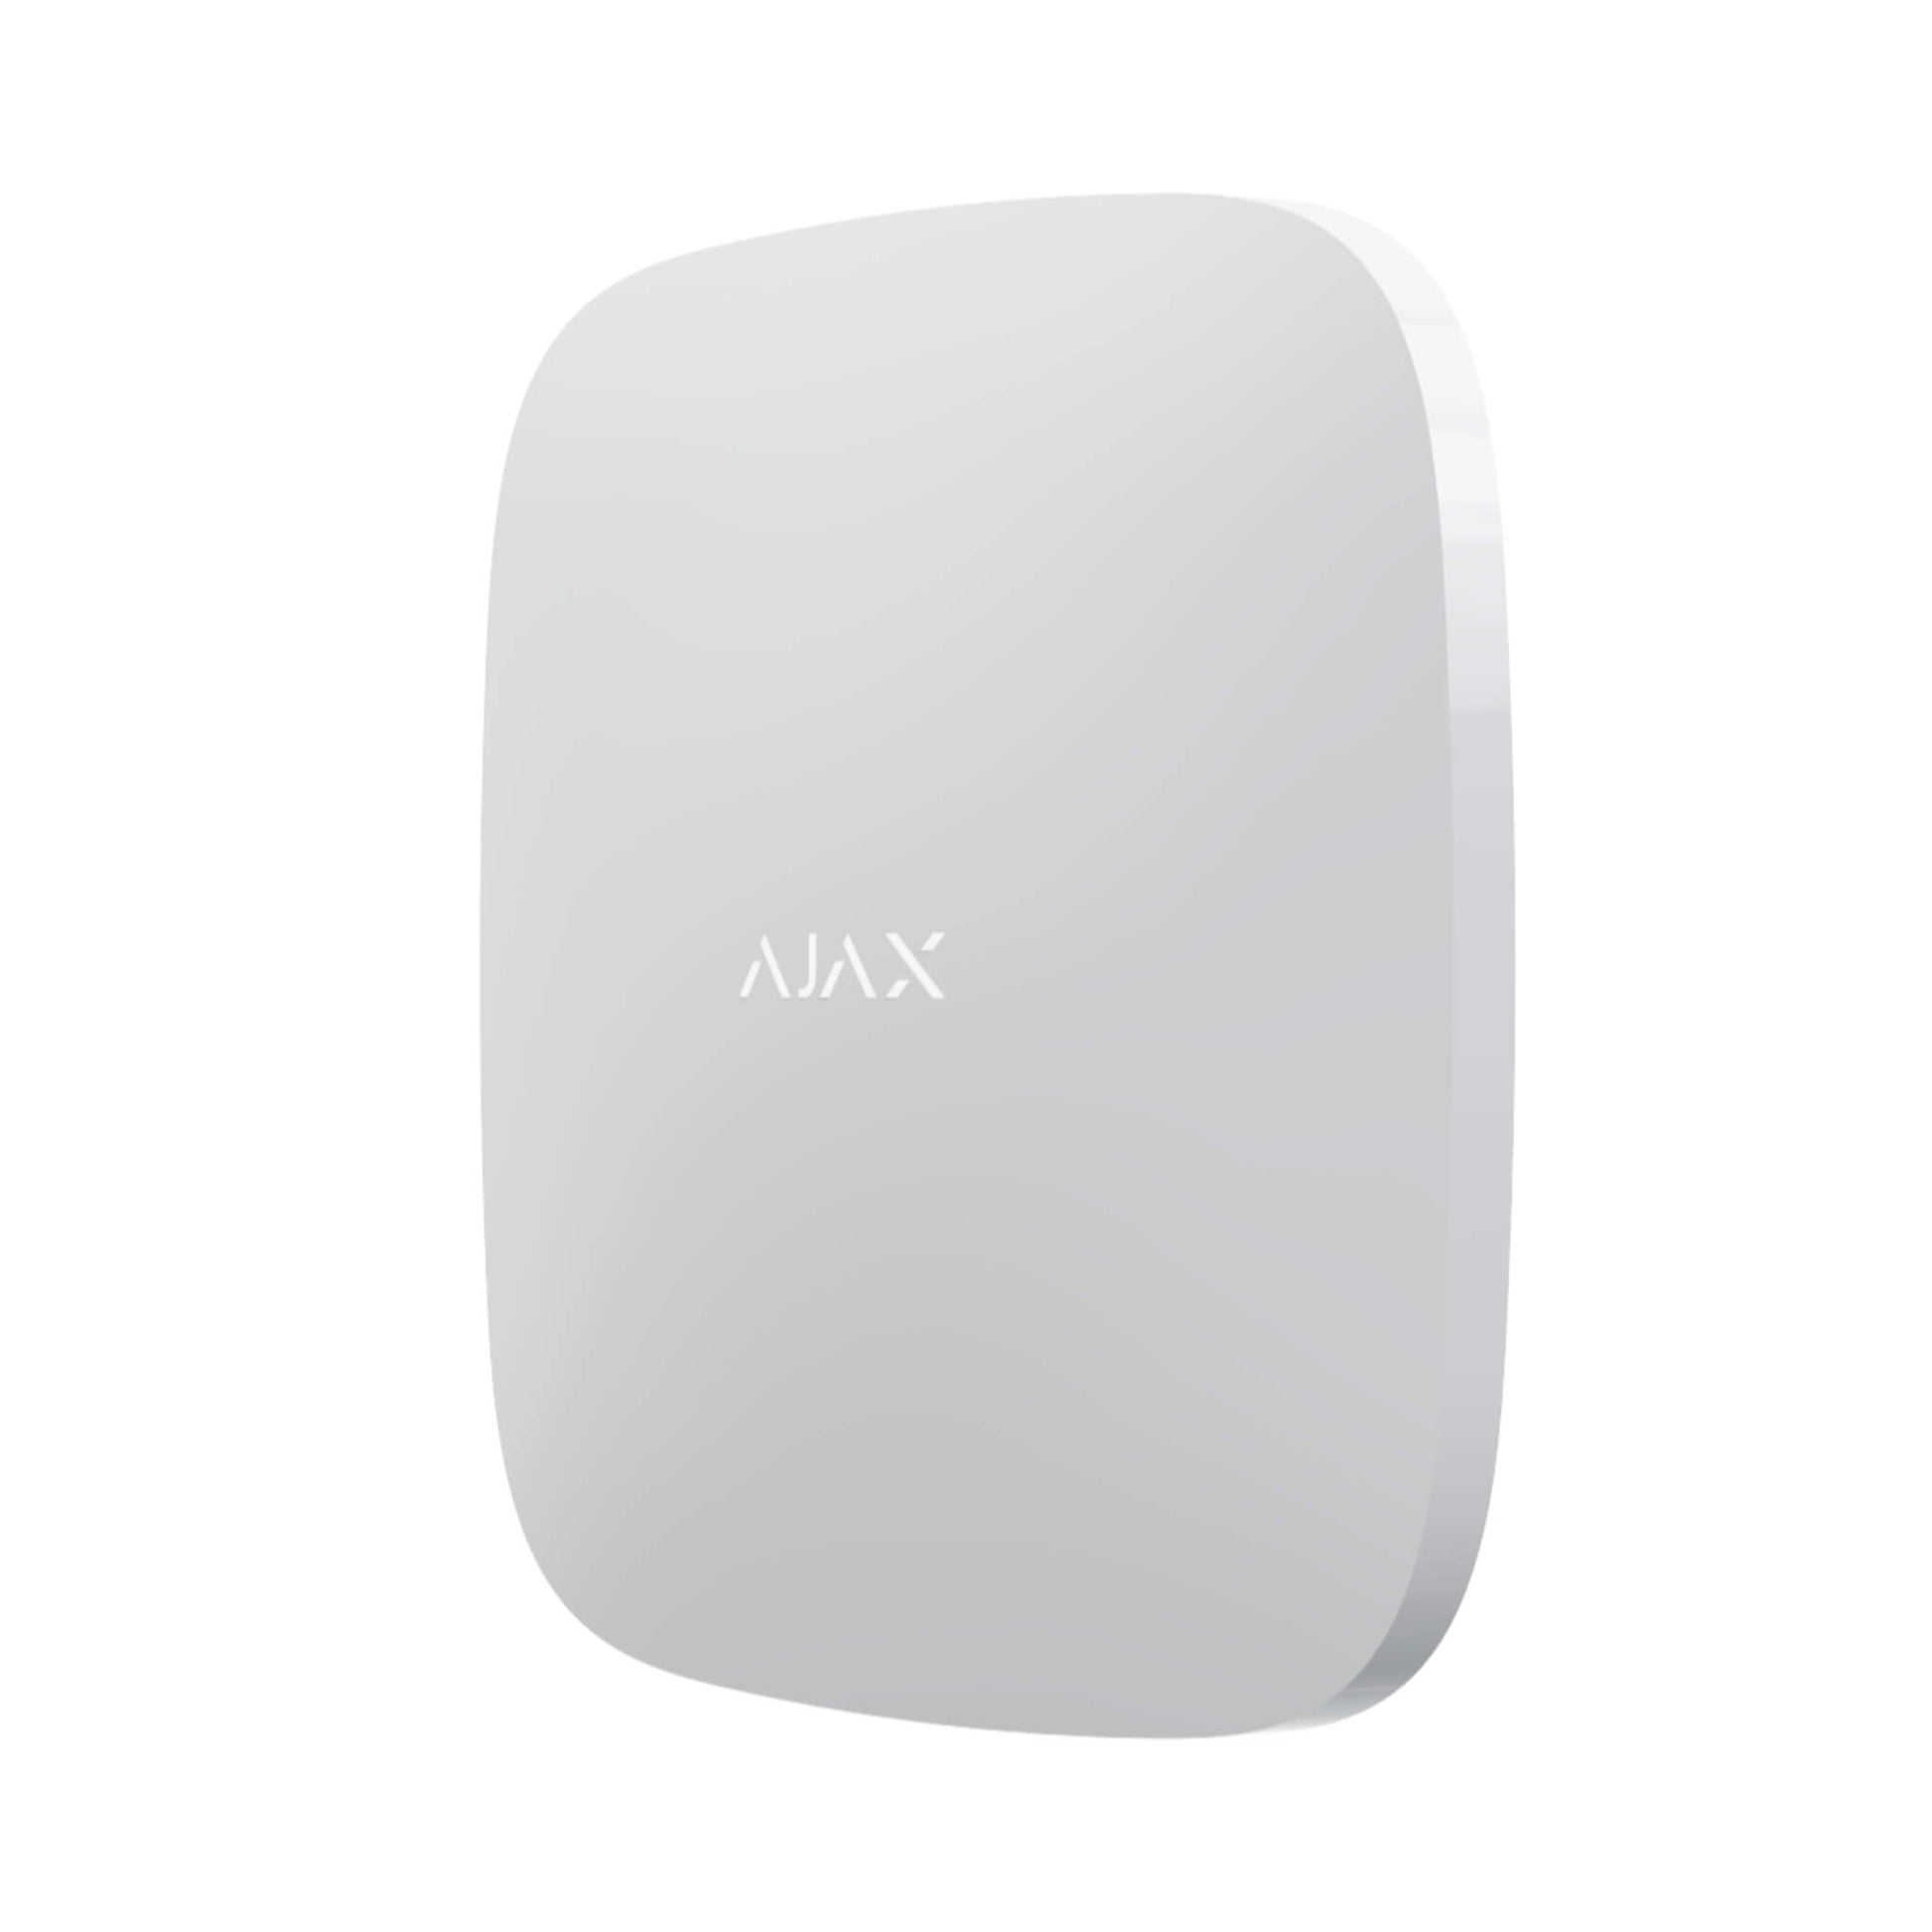 White ajax hub 2 plus front view of hub 2 plus, 163 × 163 × 36 mm in size , 351g in weight Ajax Hub 2 plus for home and business security, turned right view